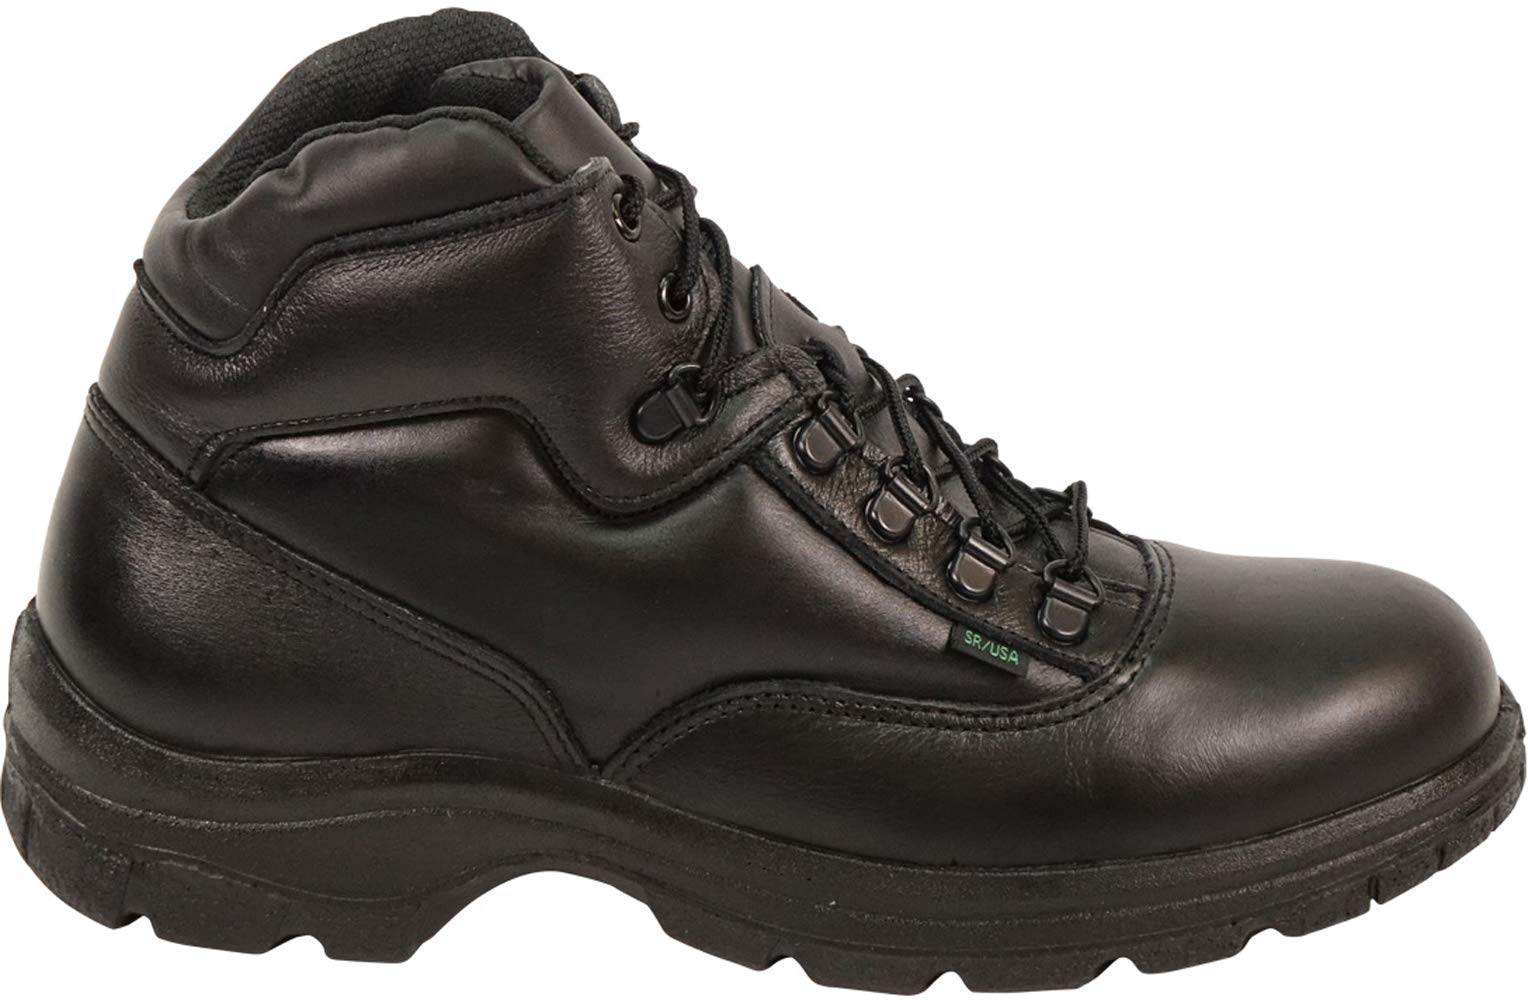 Thorogood Soft Streets Ultimate Cross-Trainer Work Shoes for Men - Premium Black Leather with Comfort Insole and Slip-Resistant Outsole; Berry Compliant and Postal Certified